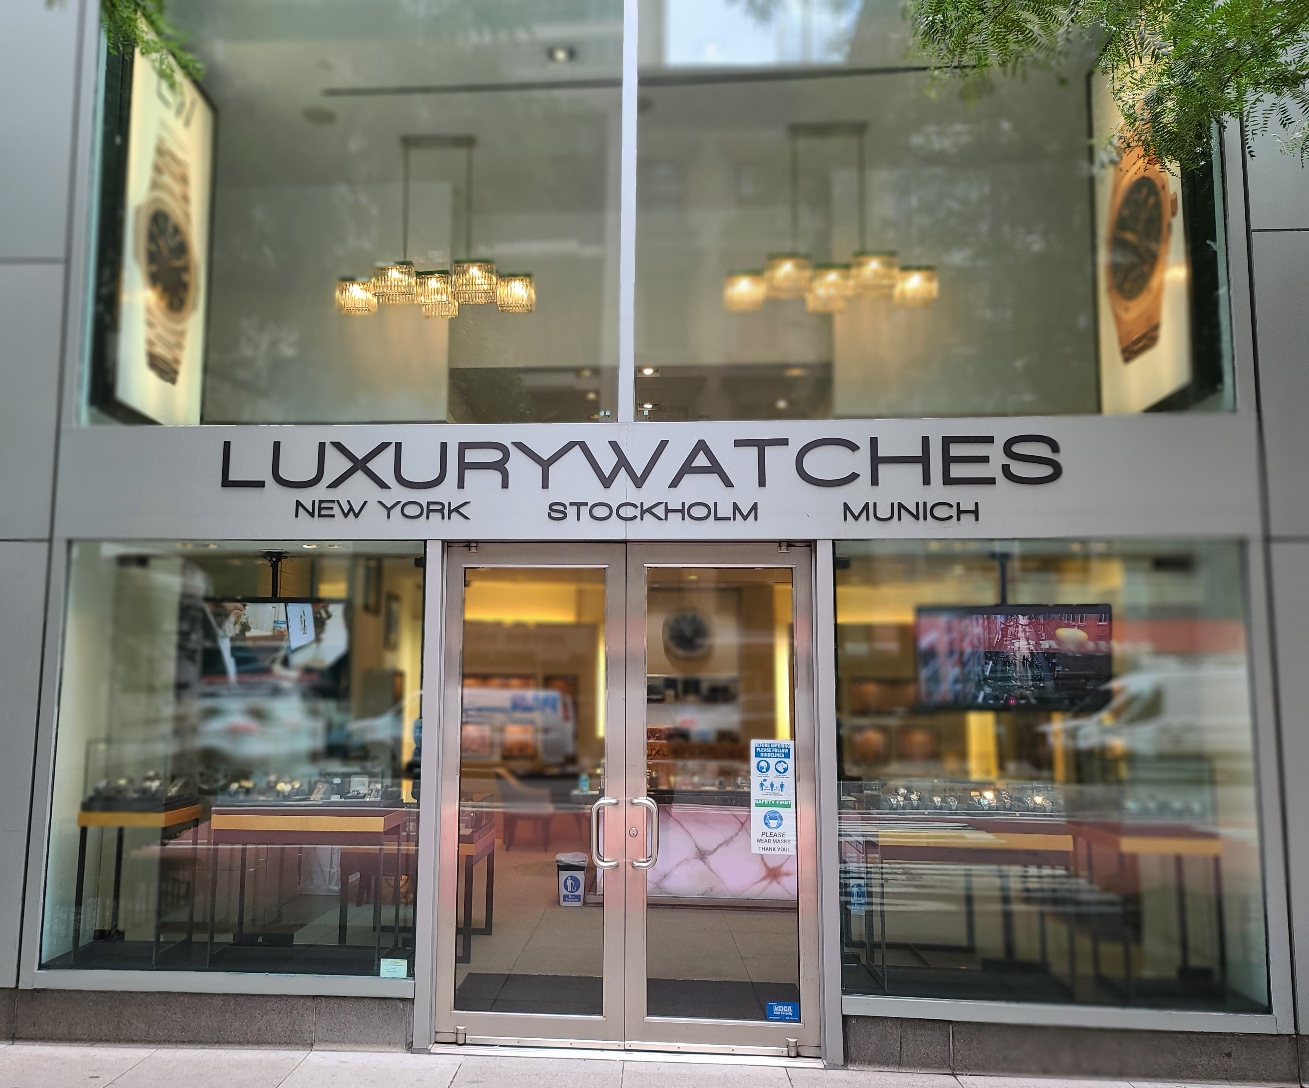 Luxurywatches — A Luxury Watch Store for the Most Ardent Collectors